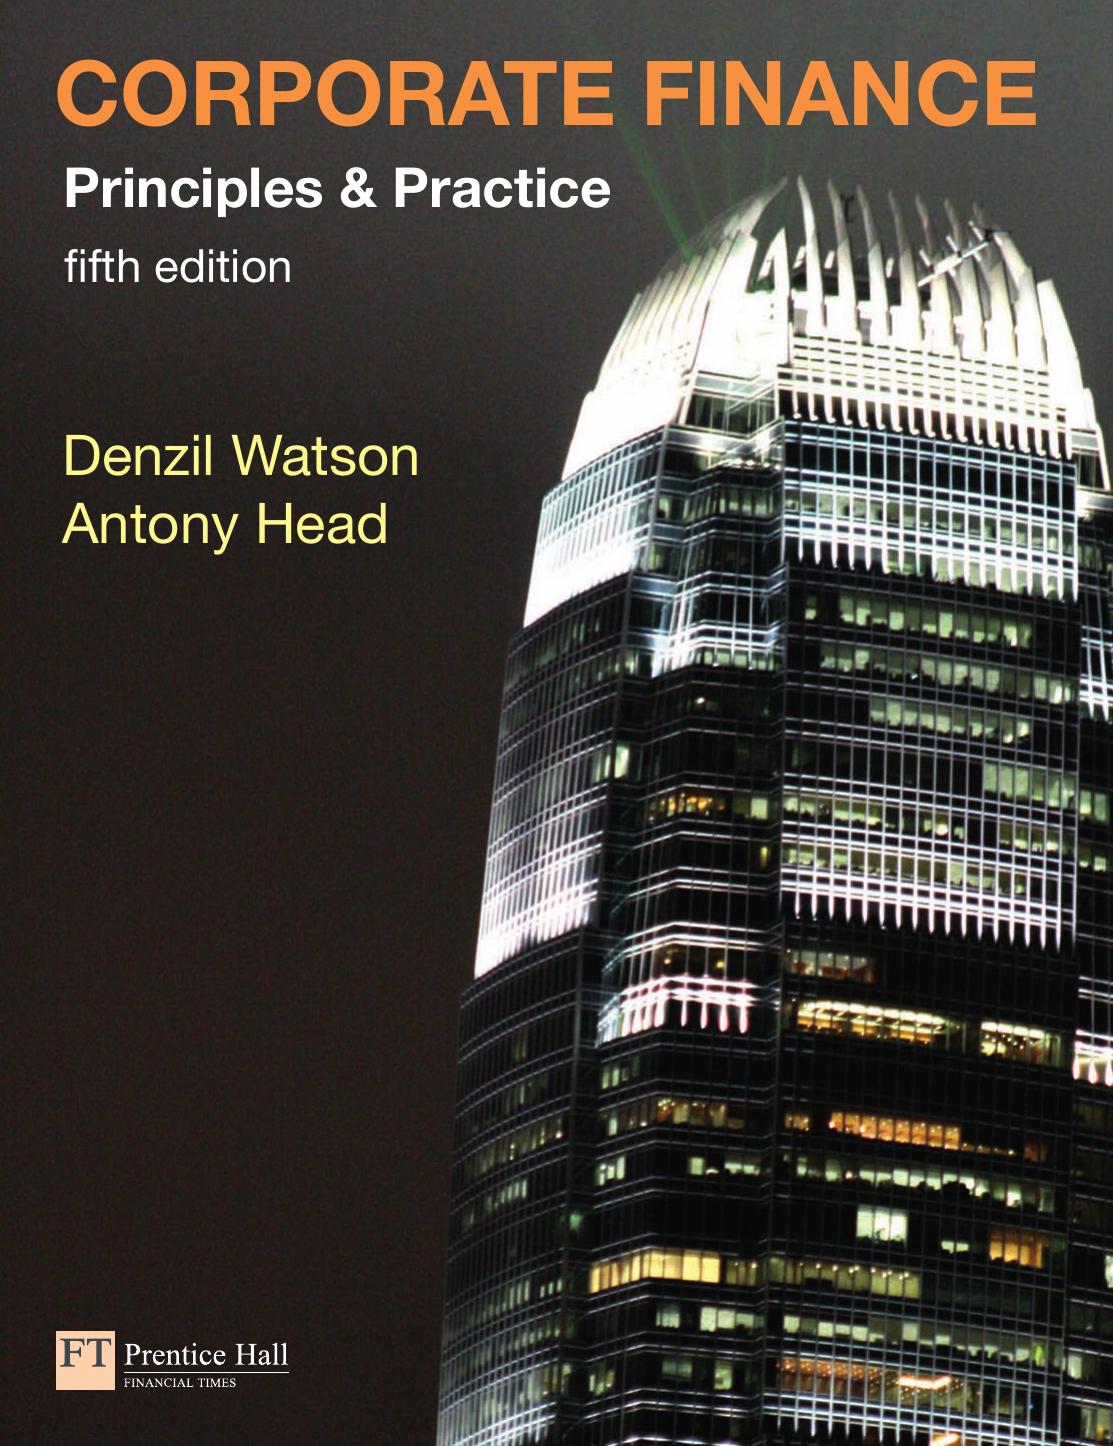 Corporate Finance Principles and Practice 5th Edition.jpg